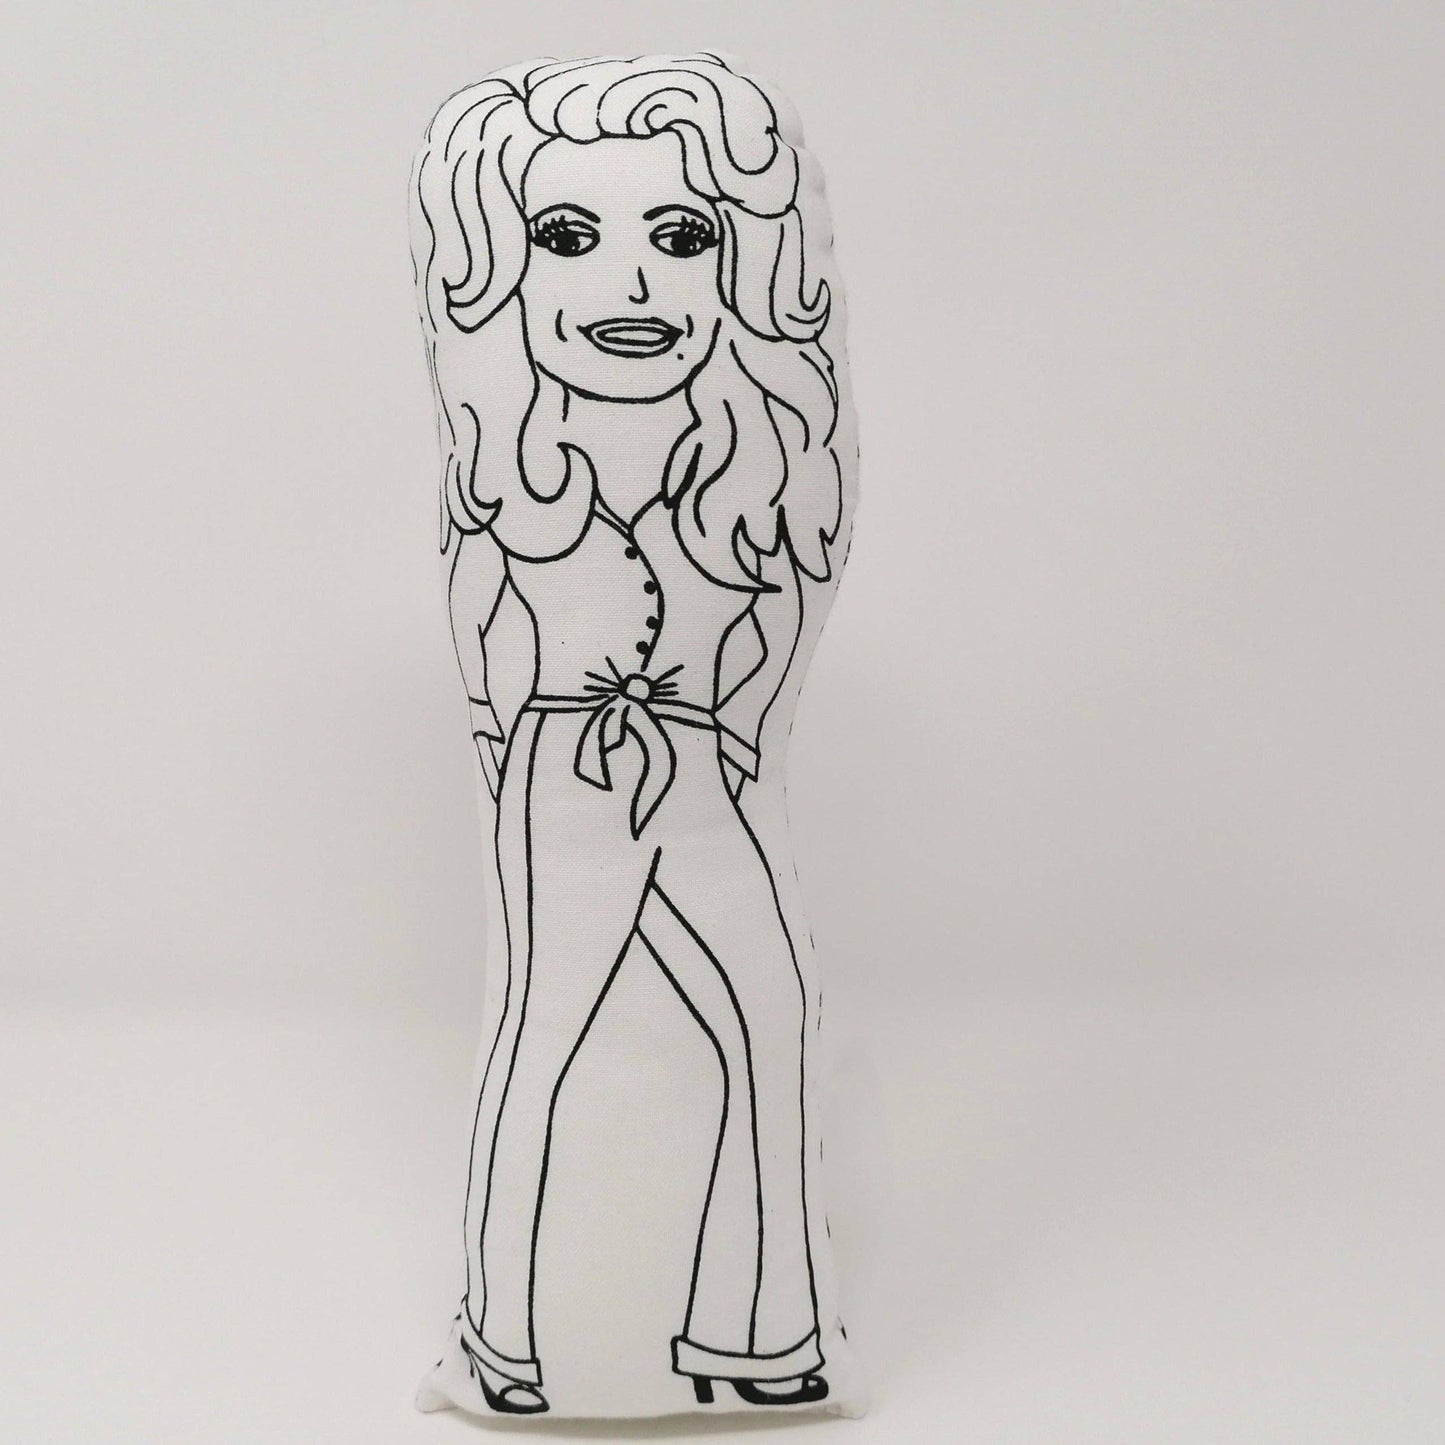 DOLLY PARTON Sew Your Own Doll Kit: Full Kit with stuffing